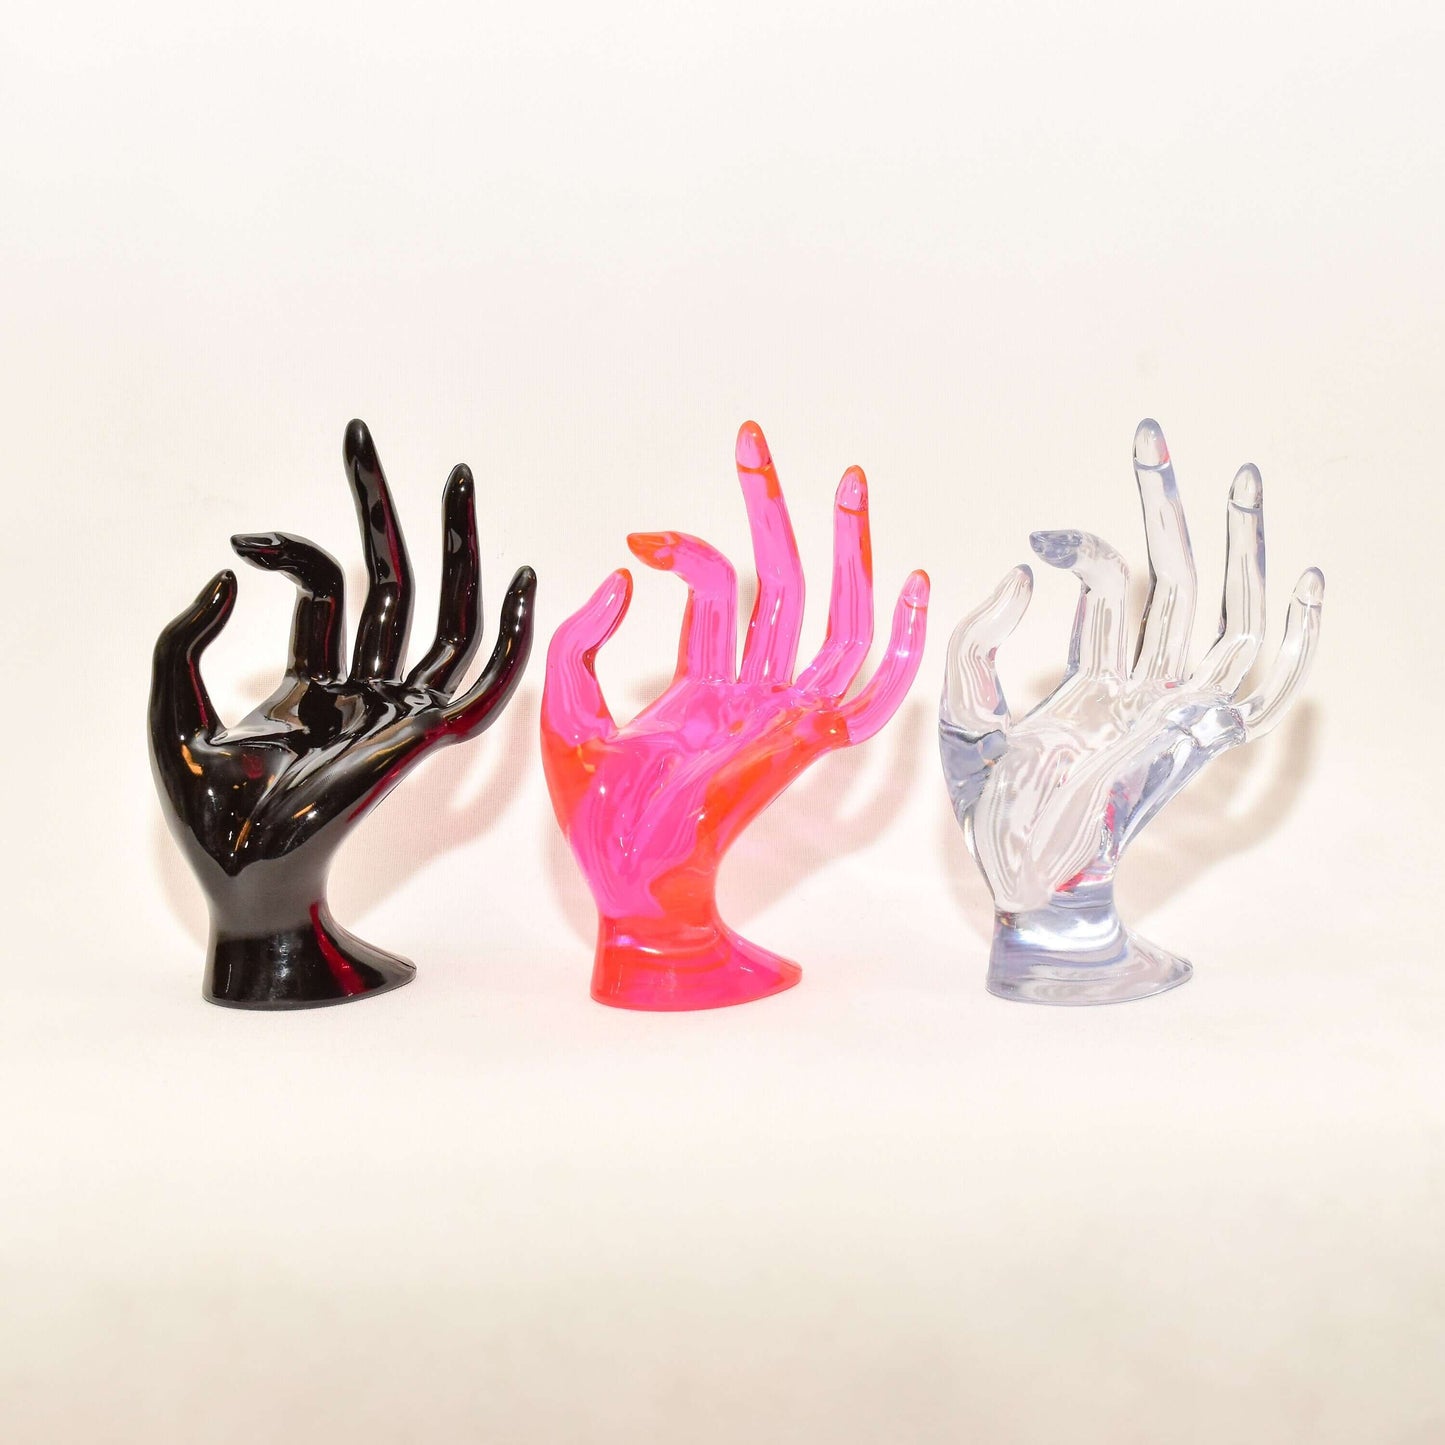 Acrylic Hand Form Ring Holder, Cute Semi-Translucent Jewelry Display, Mannequin OK-Hand Design, 6.5" H - Good's Vintage